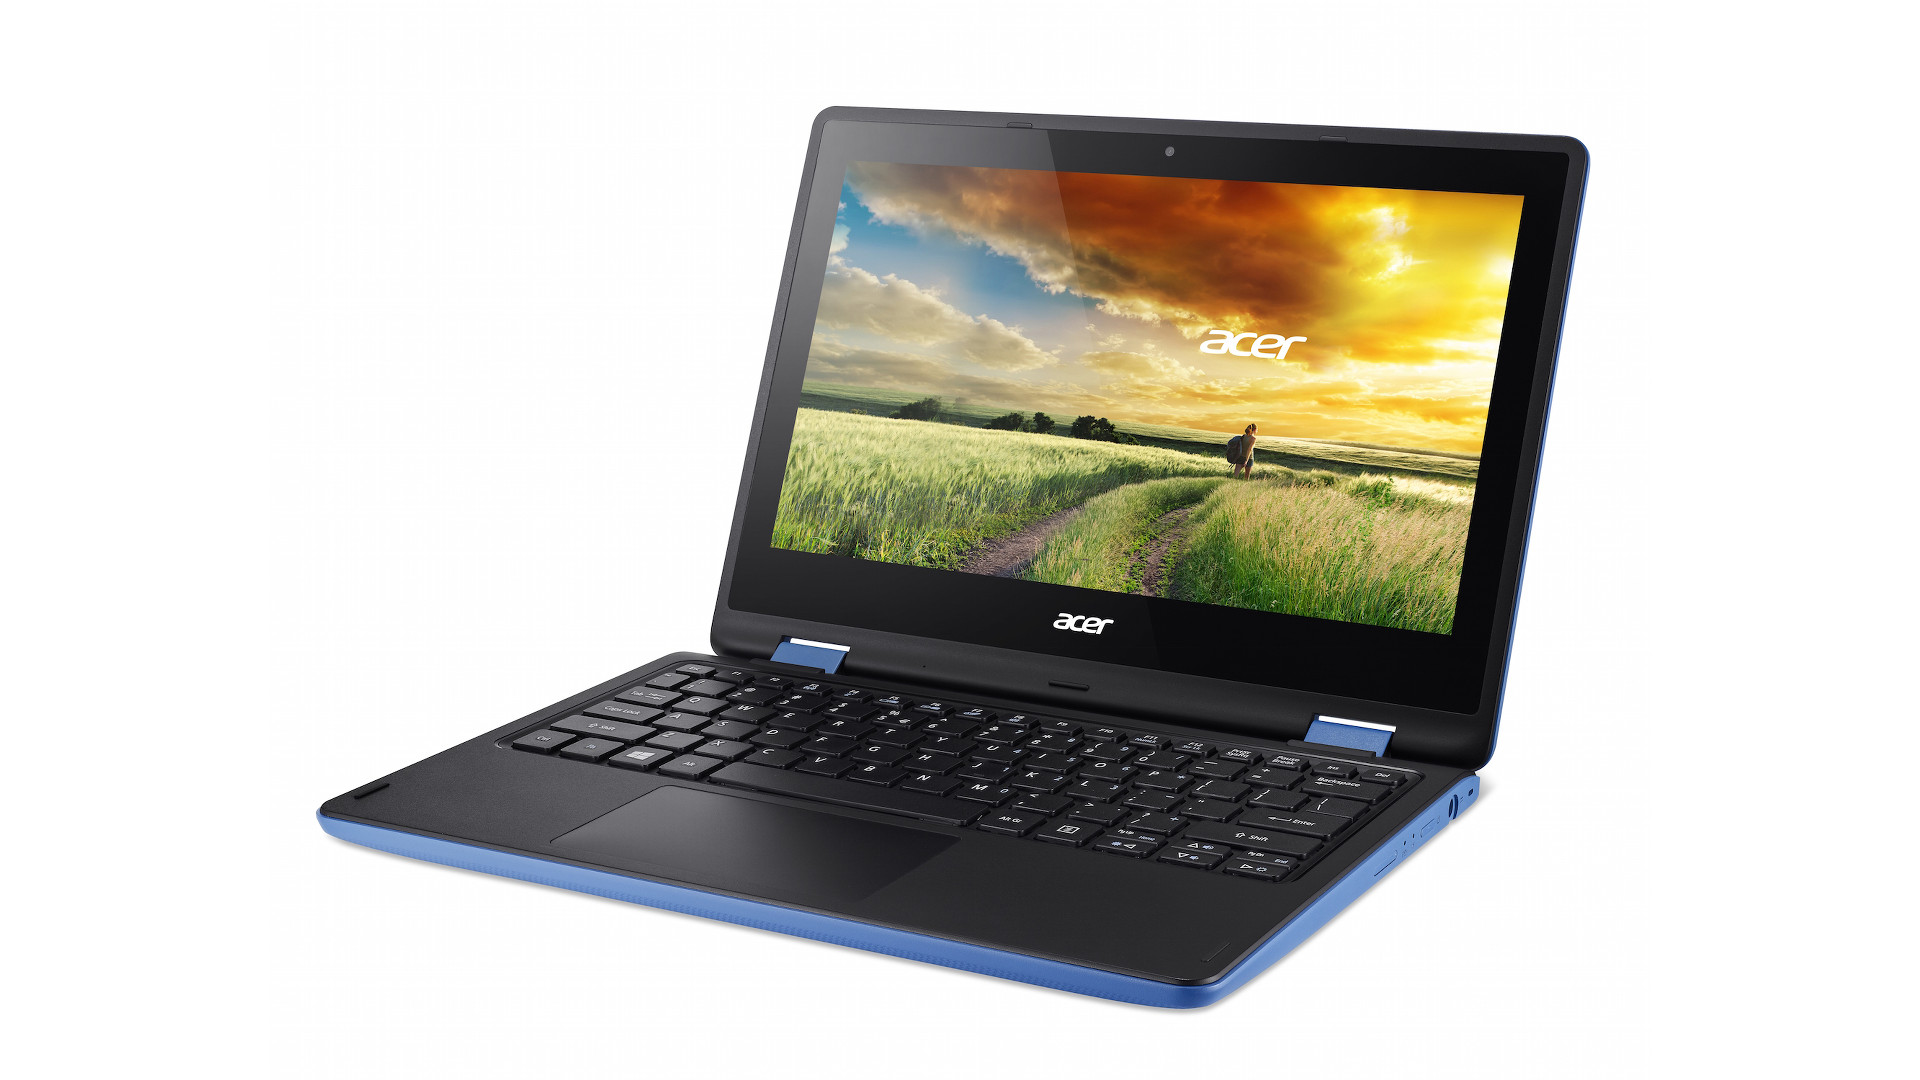 Acer ohr303. Acer r3 131t. Acer Aspire r3-131t. Ноутбук Acer Aspire r3-131t-p4sy. Ноутбук Асер аспире трансформер.